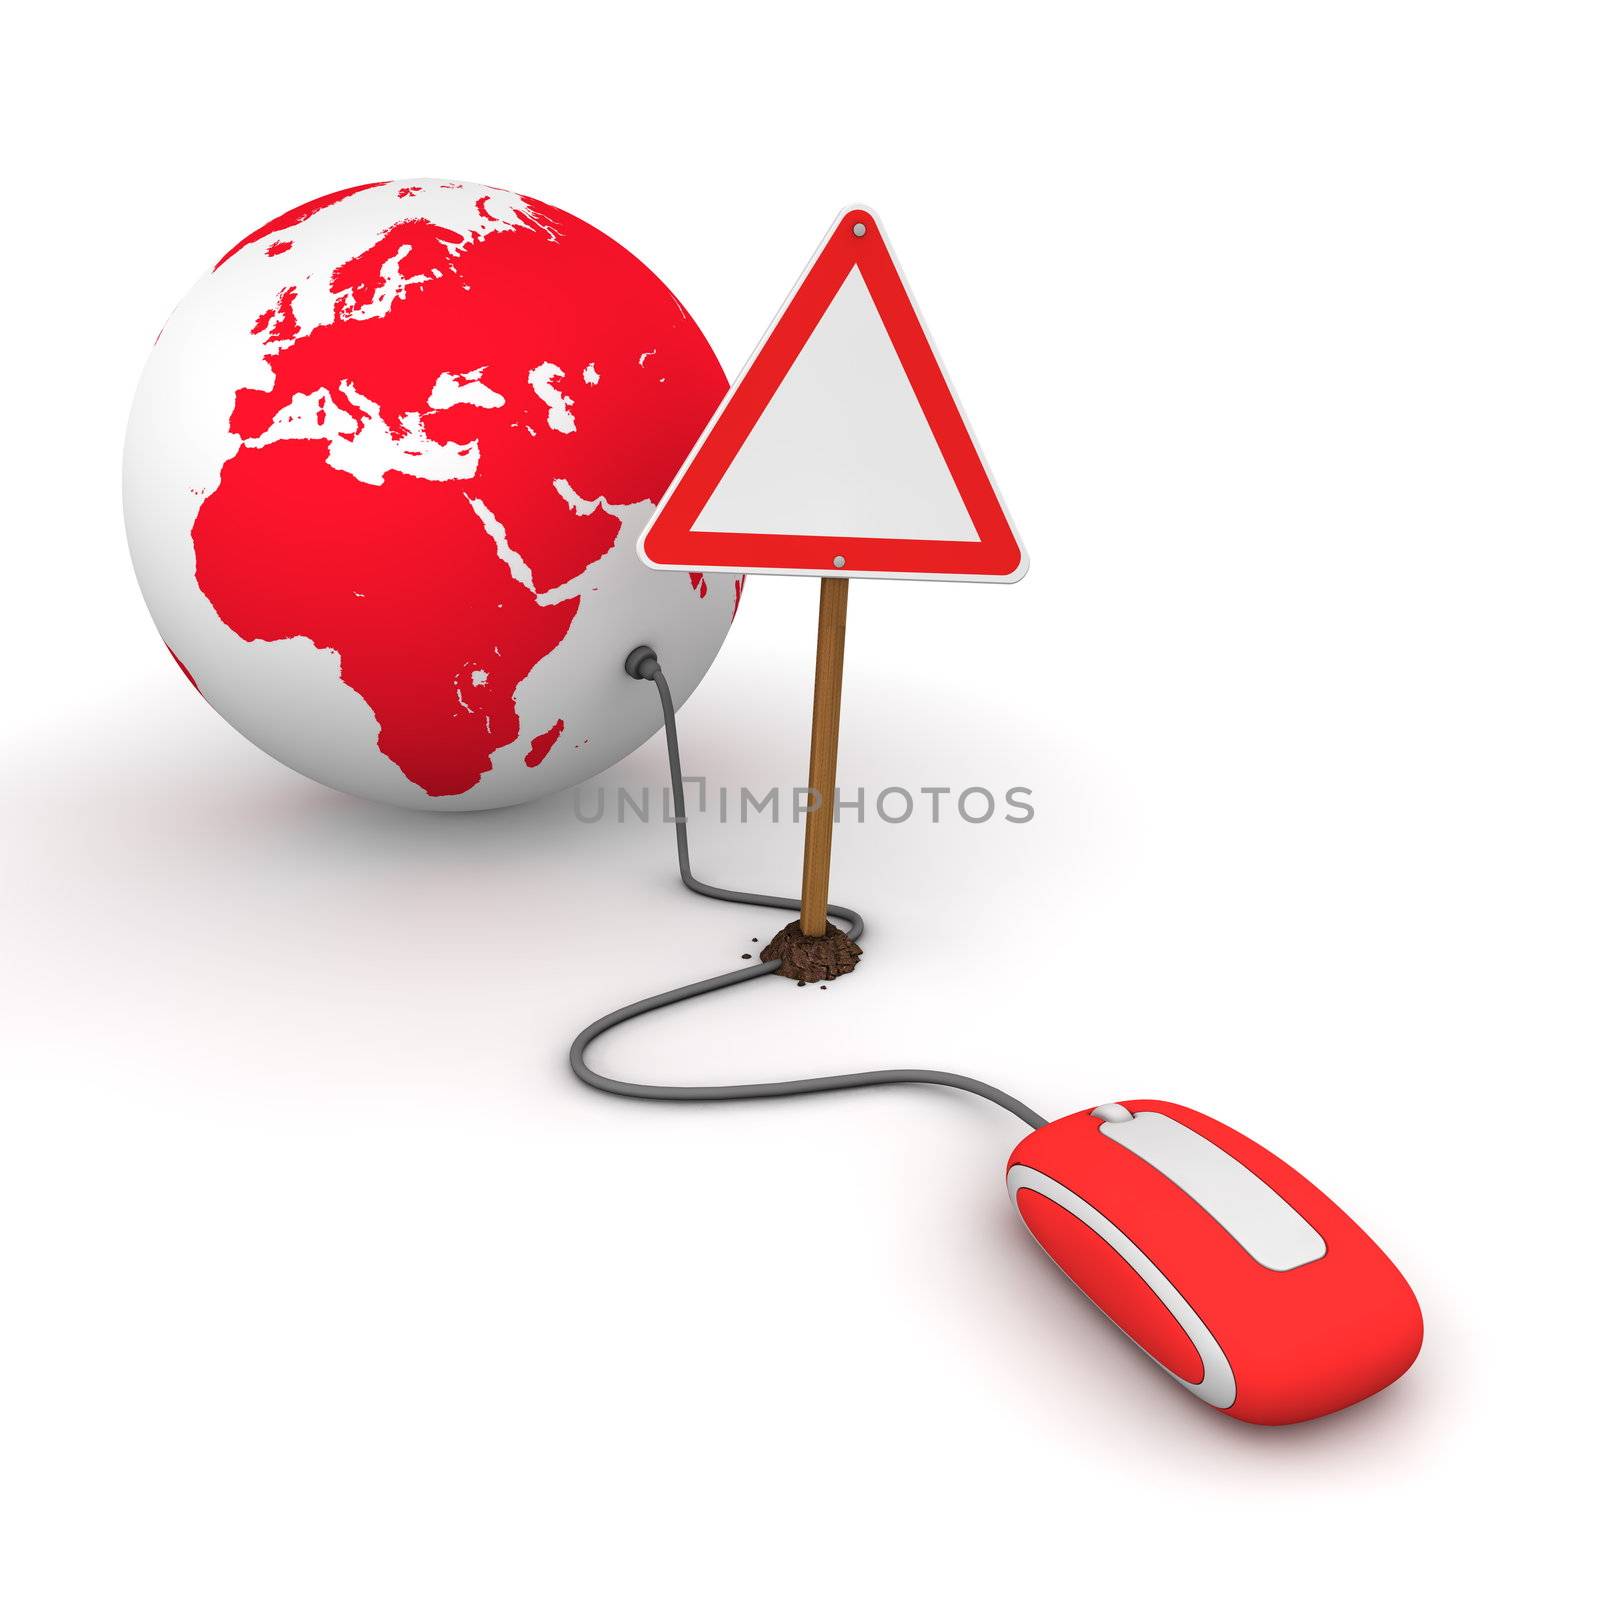 Surfing the Web in Red - Blocked by a Triangular Warning Sign by PixBox